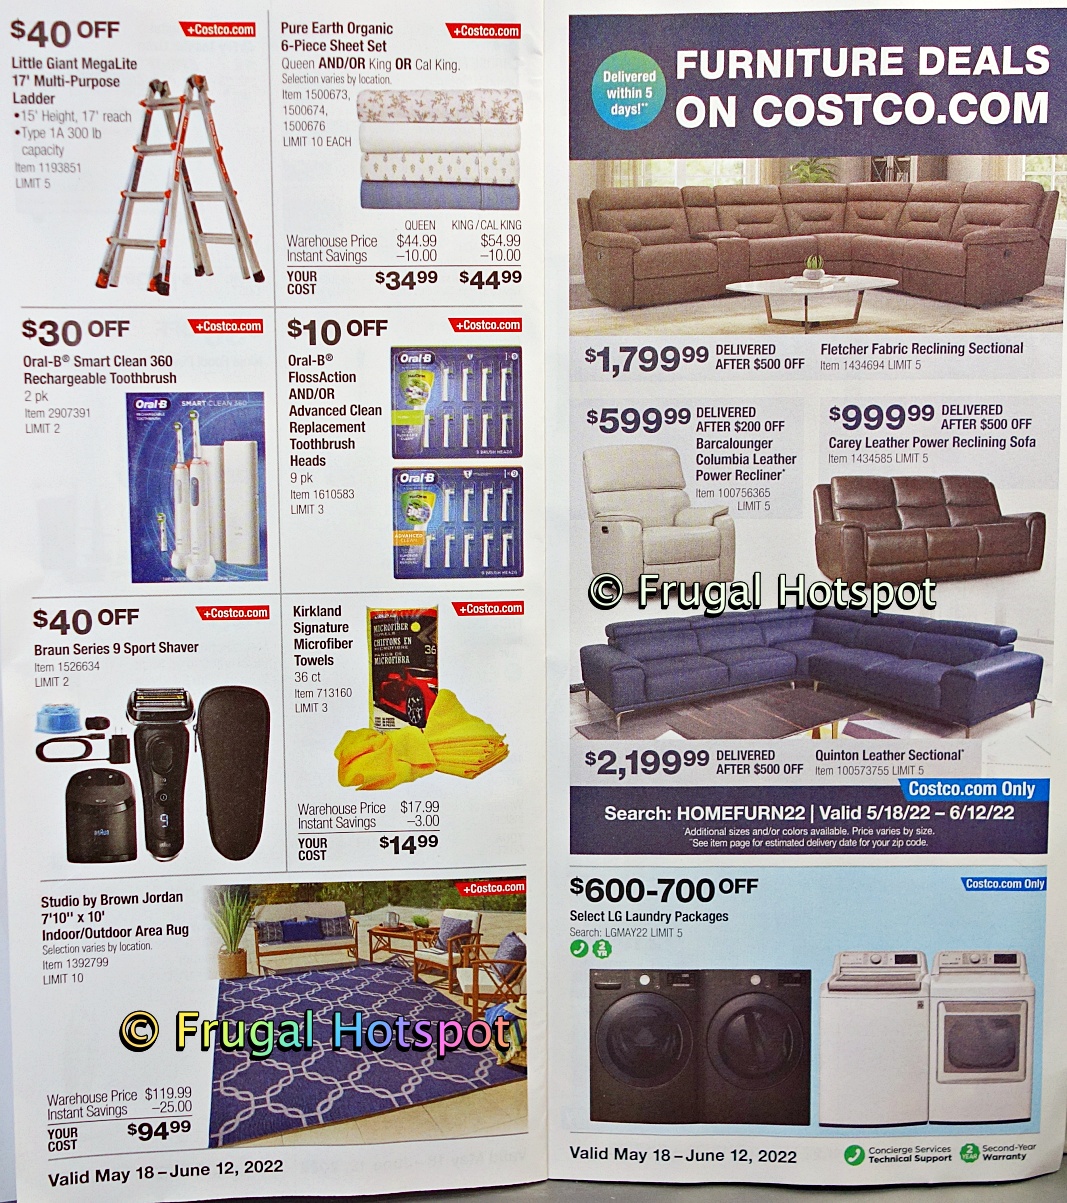 Costco MAY JUNE 2022 Coupon Book | P 14 and 15